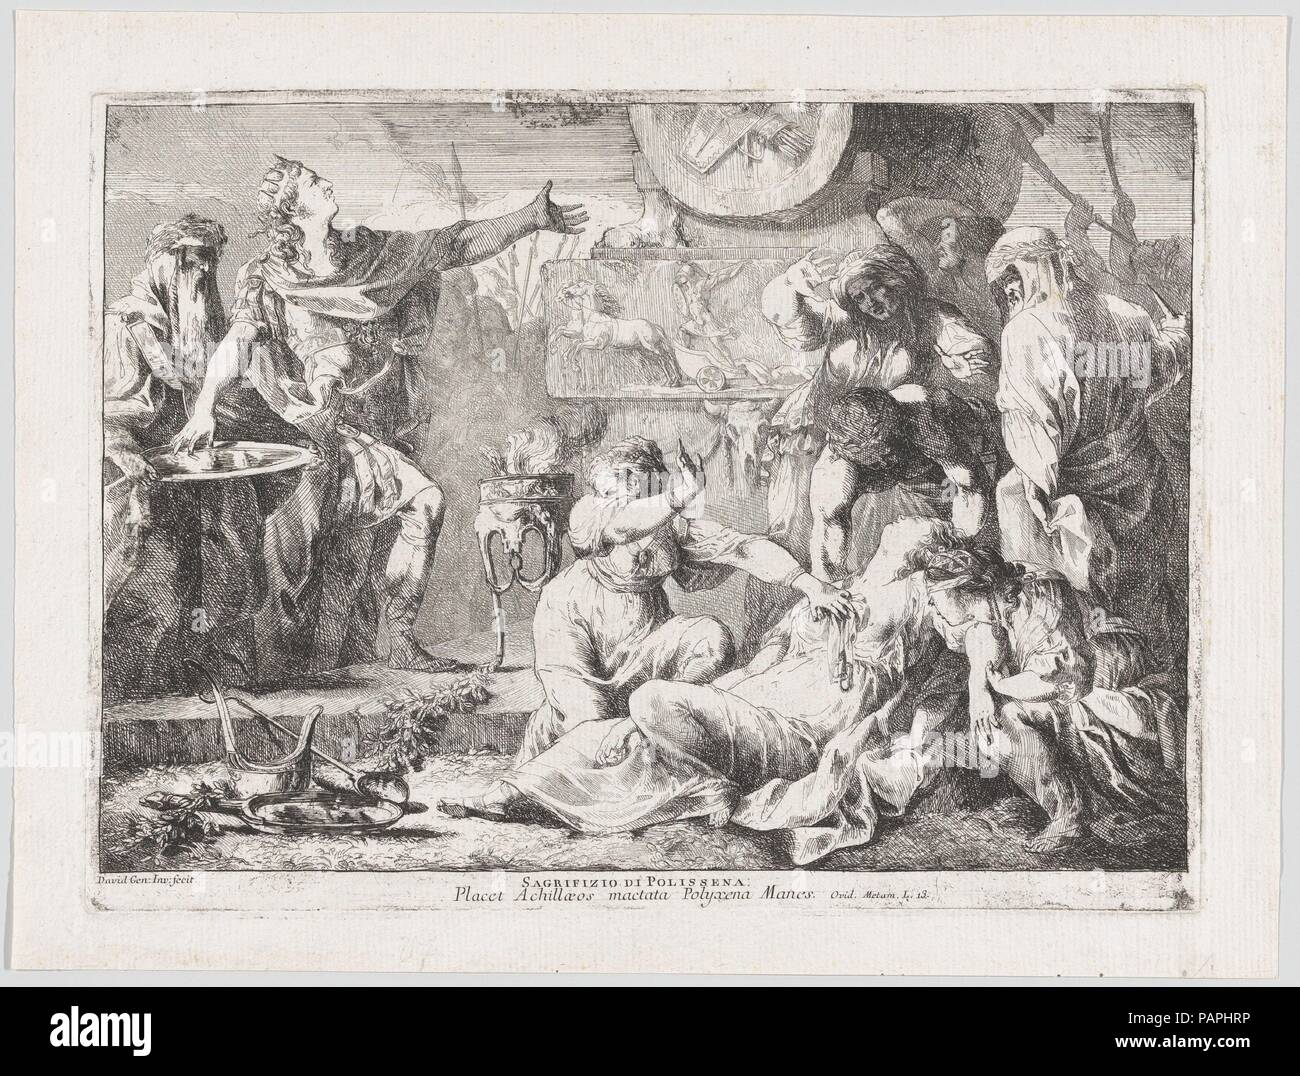 The Sacrifice of Polyxena. Artist: Giovanni David (Italian, Cabella Ligure 1749-1790 Genoa). Dimensions: plate: 8 3/4 x 11 15/16 in. (22.2 x 30.3 cm)  sheet: 10 1/4 x 13 9/16 in. (26 x 34.4 cm). Date: 1776.  According to Greek legend, the warrior Achilles fell in love with Polyxena, daughter of King Priam of Troy. She was promised to him in marriage if he agreed to end the war between the Greeks and the Trojans. Achilles was ambushed by Polyxena's brothers, however, who shot a poisoned arrow in his heel--hence the expression 'Achilles heel,' a point of vulnerability. Before he died, Achilles o Stock Photo